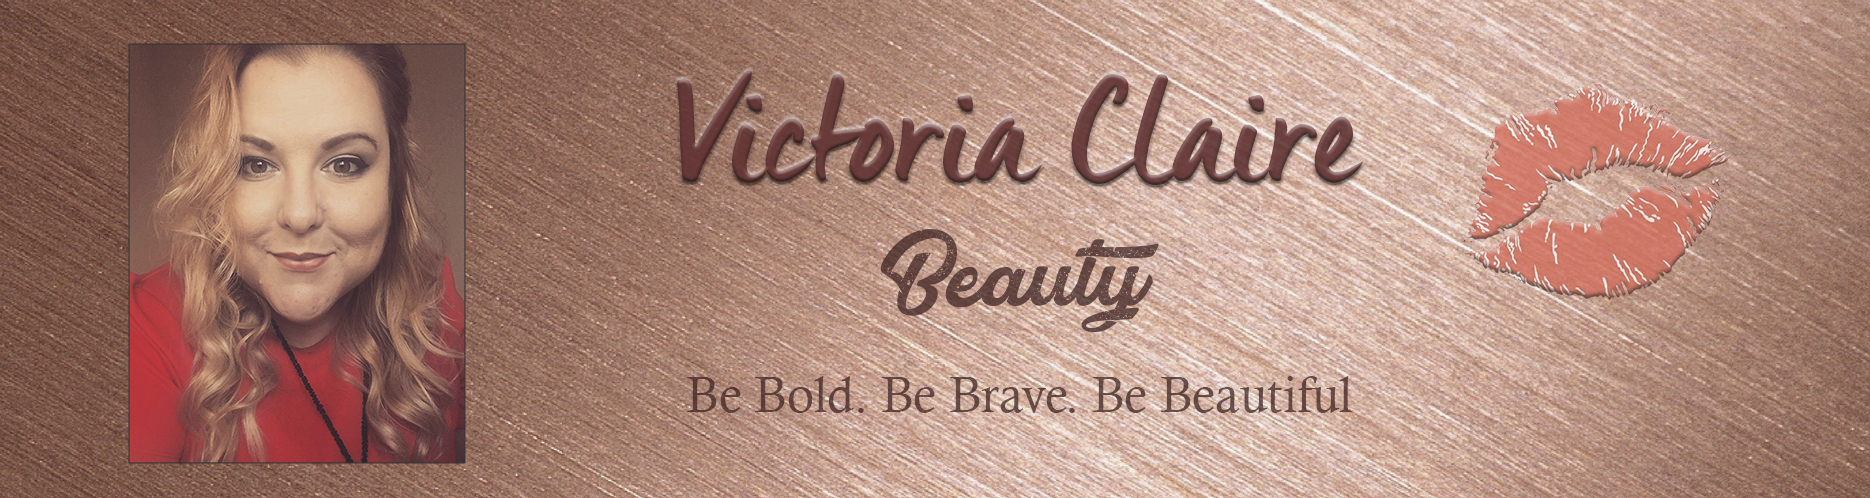 Victoria Claire Beauty – Be Bold, Be Brave, Be Beautiful.